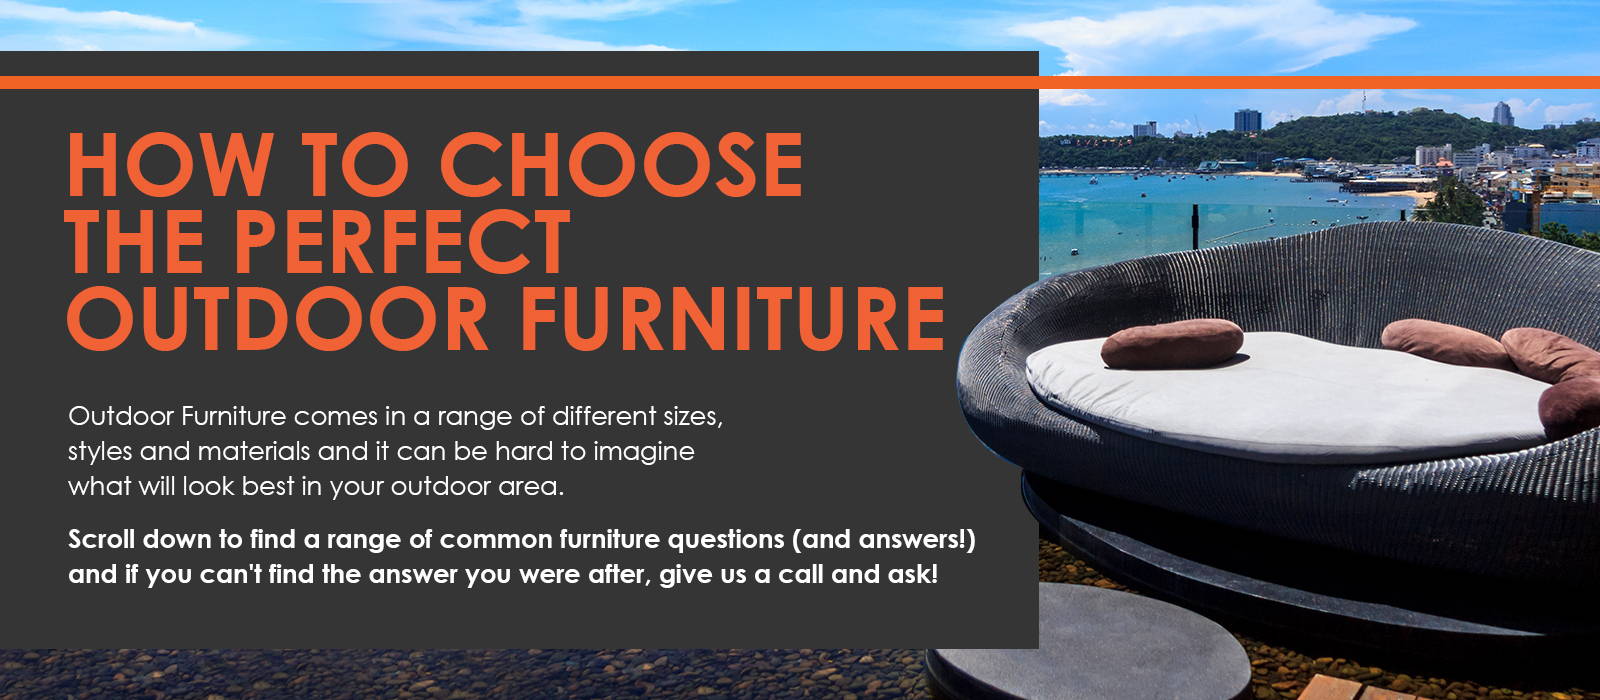 How to choose the perfect Outdoor Furniture